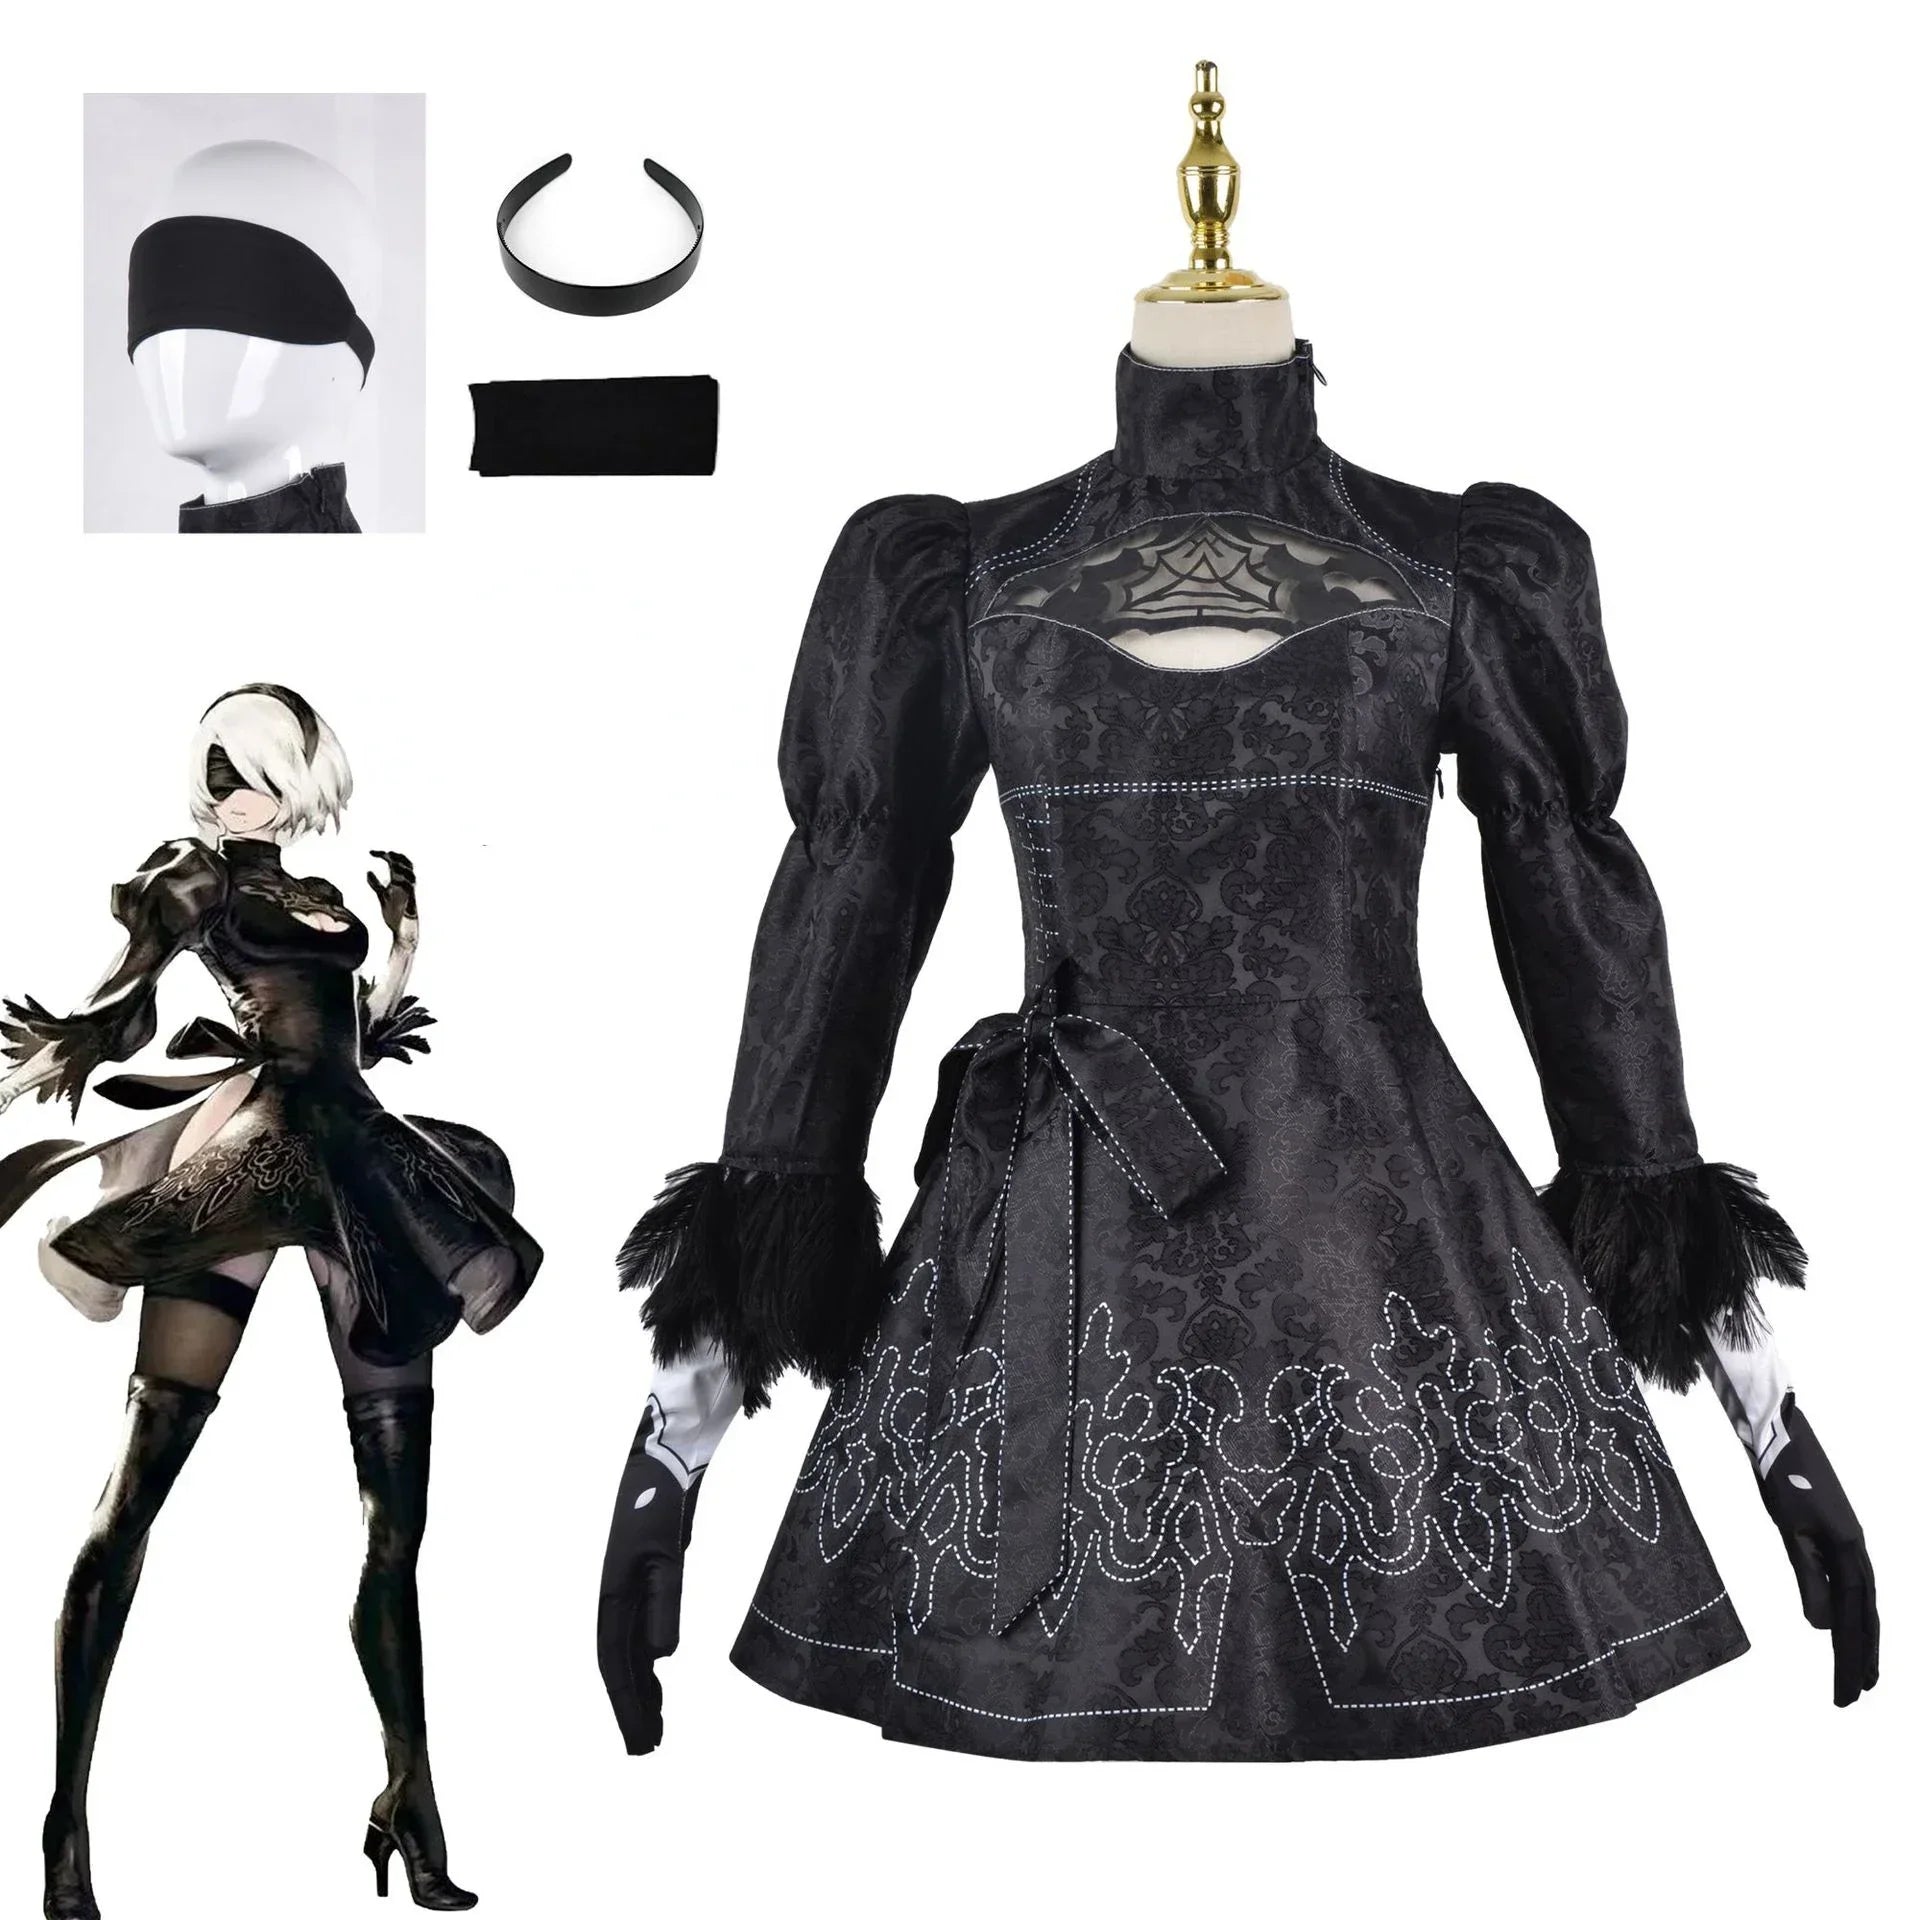 Cosplay Costume Yorha 2B sexy Outfit Games Women Role Play Costumes Girls Halloween Party Fancy Dress